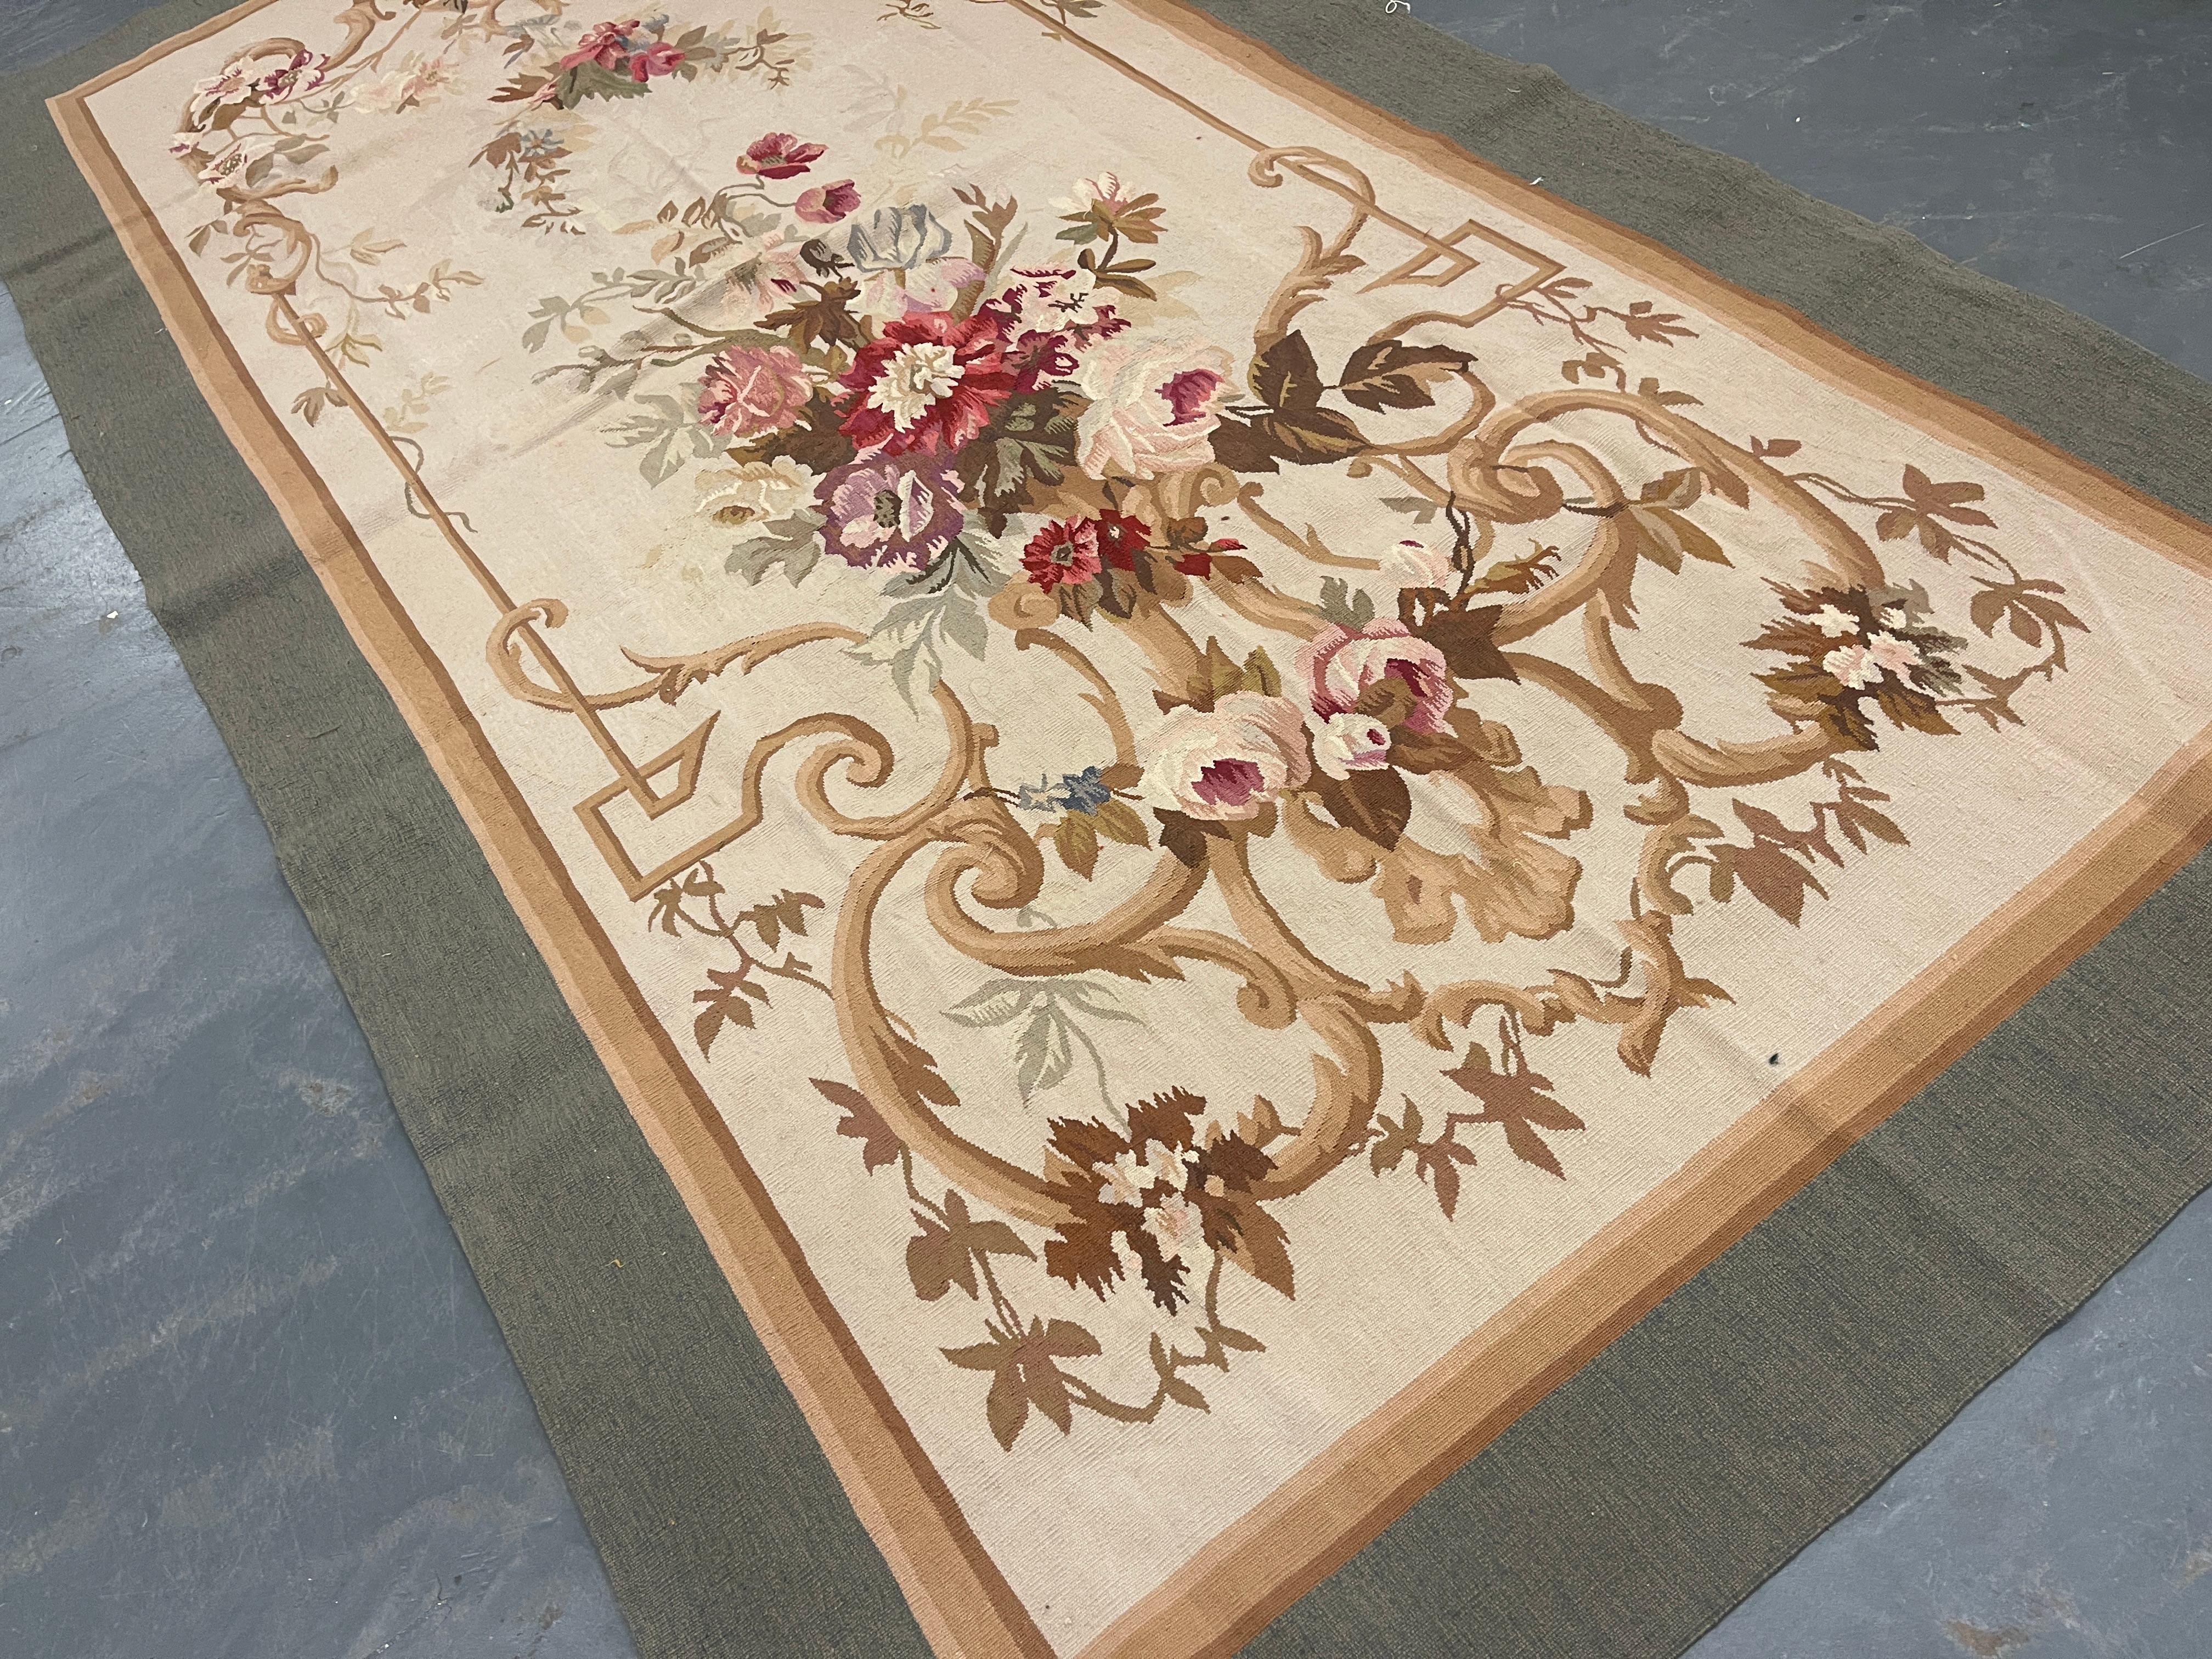 This fantastic area rug has been handwoven with a beautiful symmetrical floral design woven on an ivory beige and blue rug background with accents of cream, green and ivory. This elegant piece's colour and design make it the perfect accent rug.
This